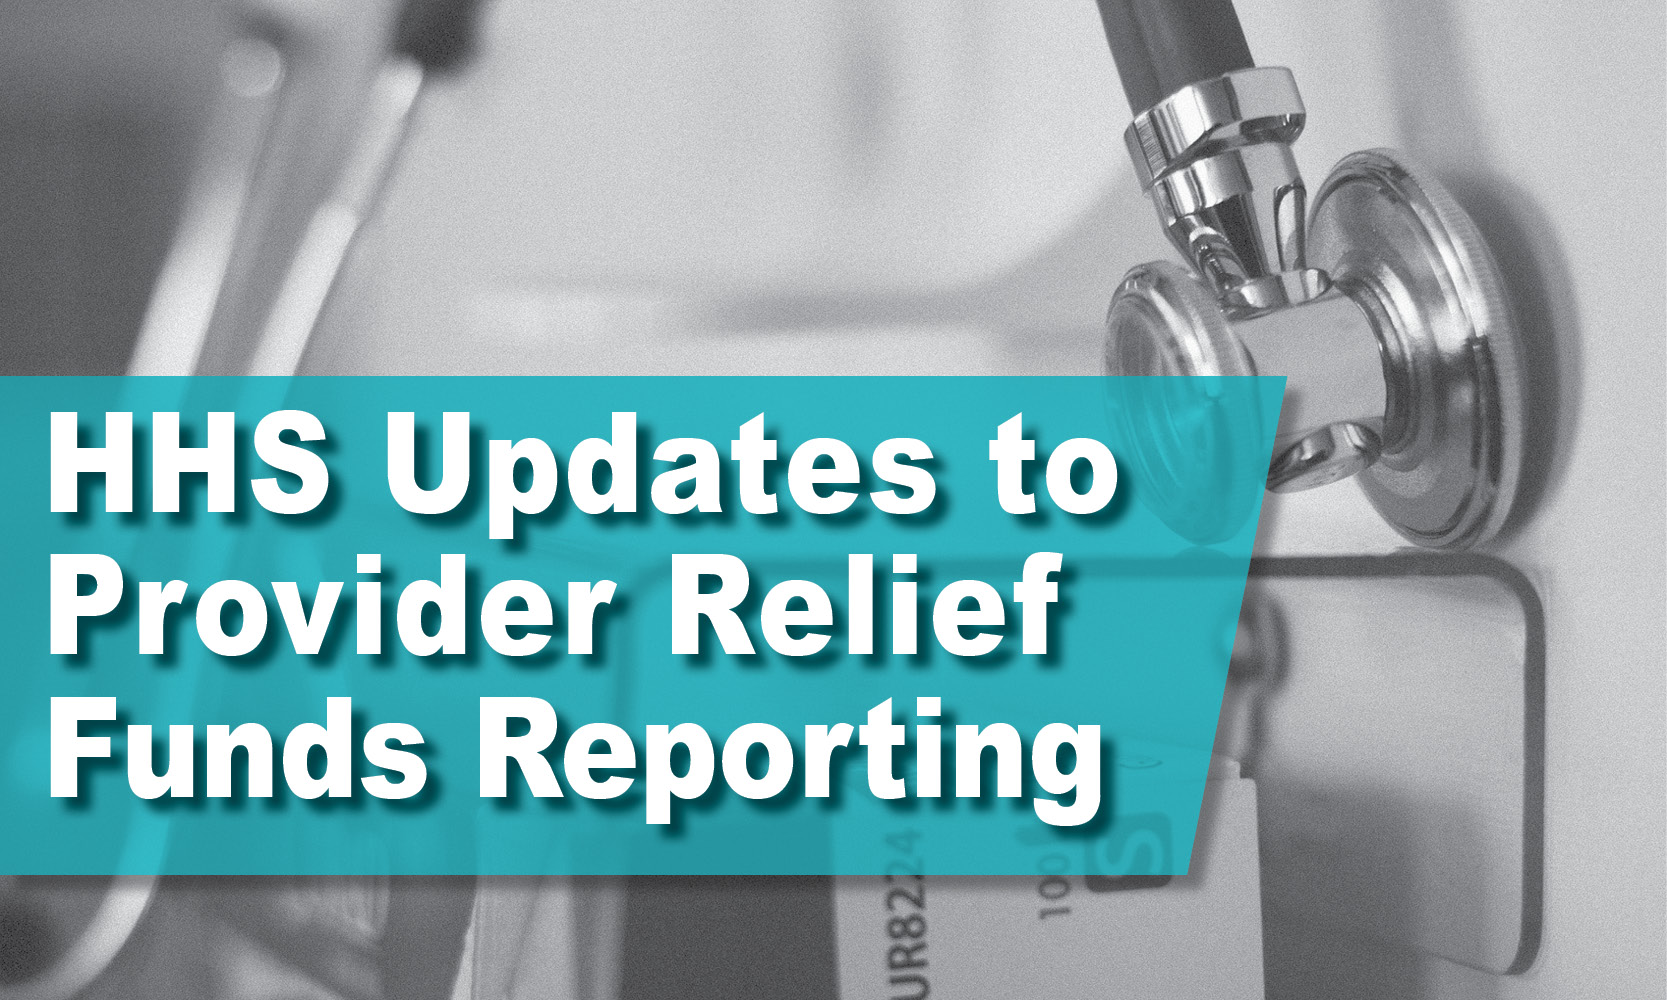 HHS Updates to Provider Relief Funds Reporting